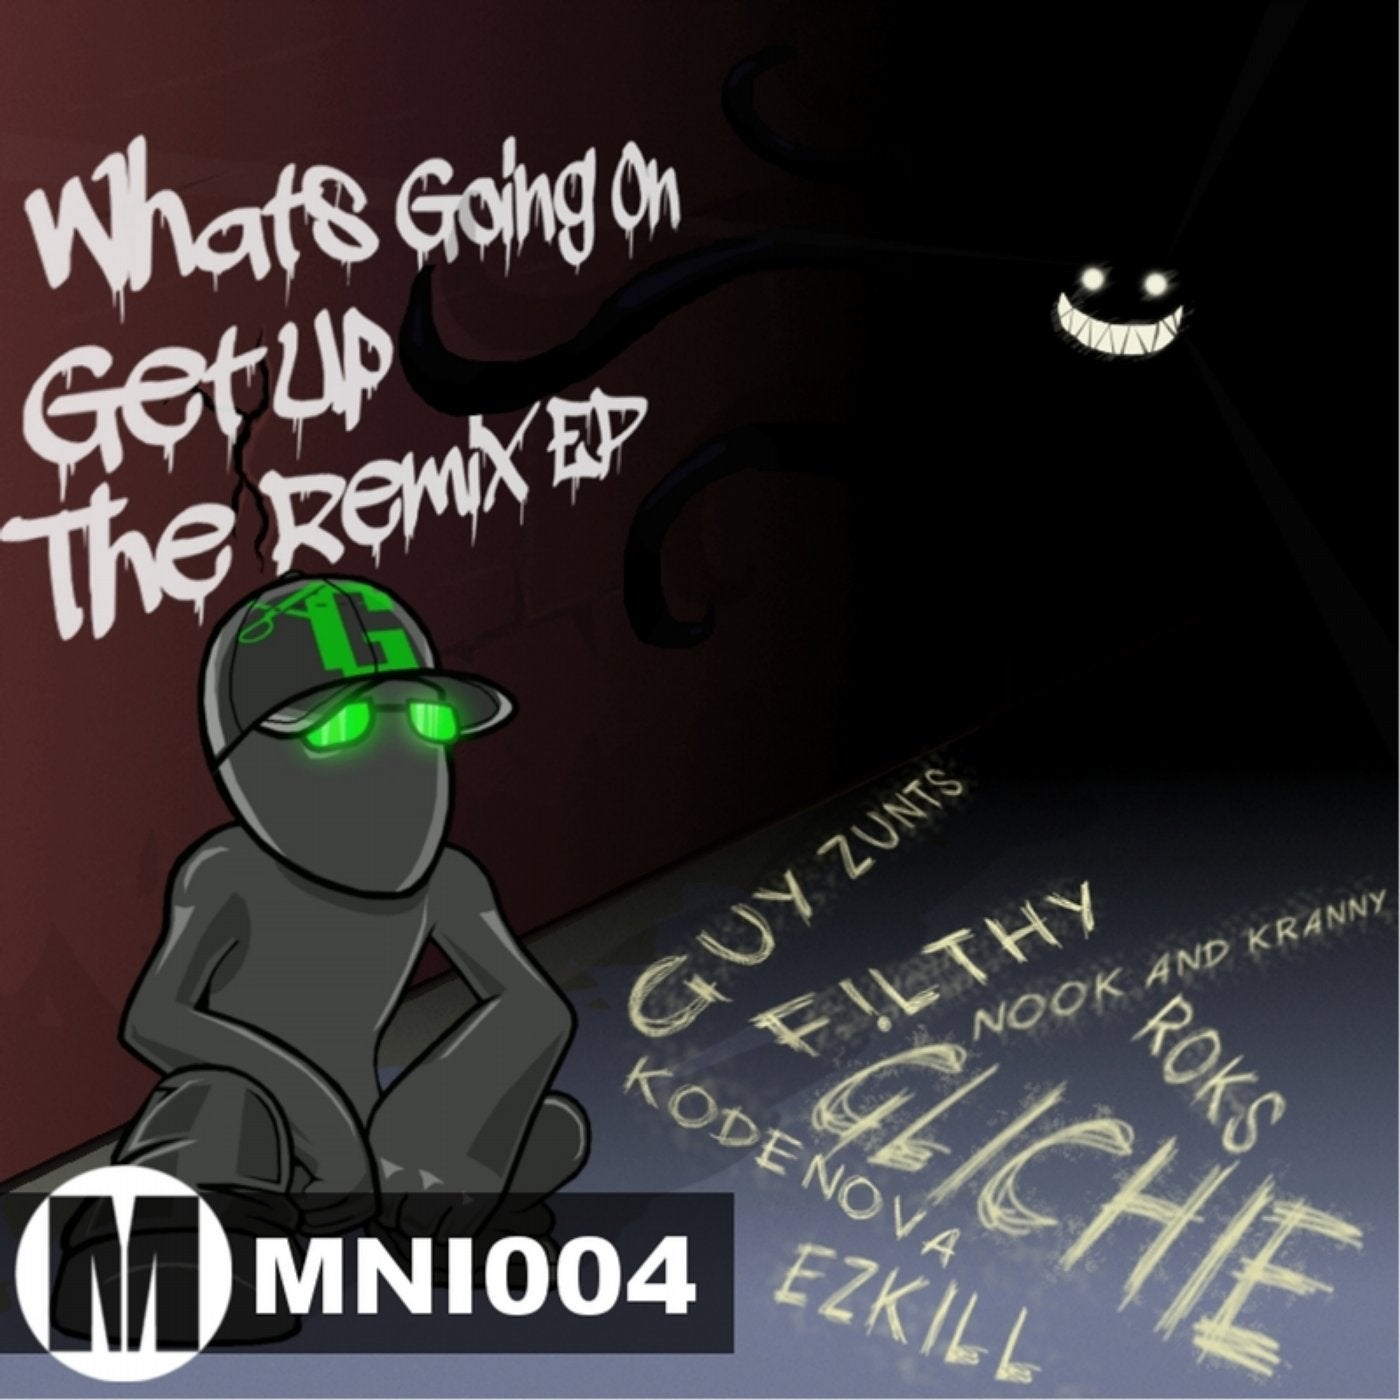 What's Going On - Get Up - The Remixes